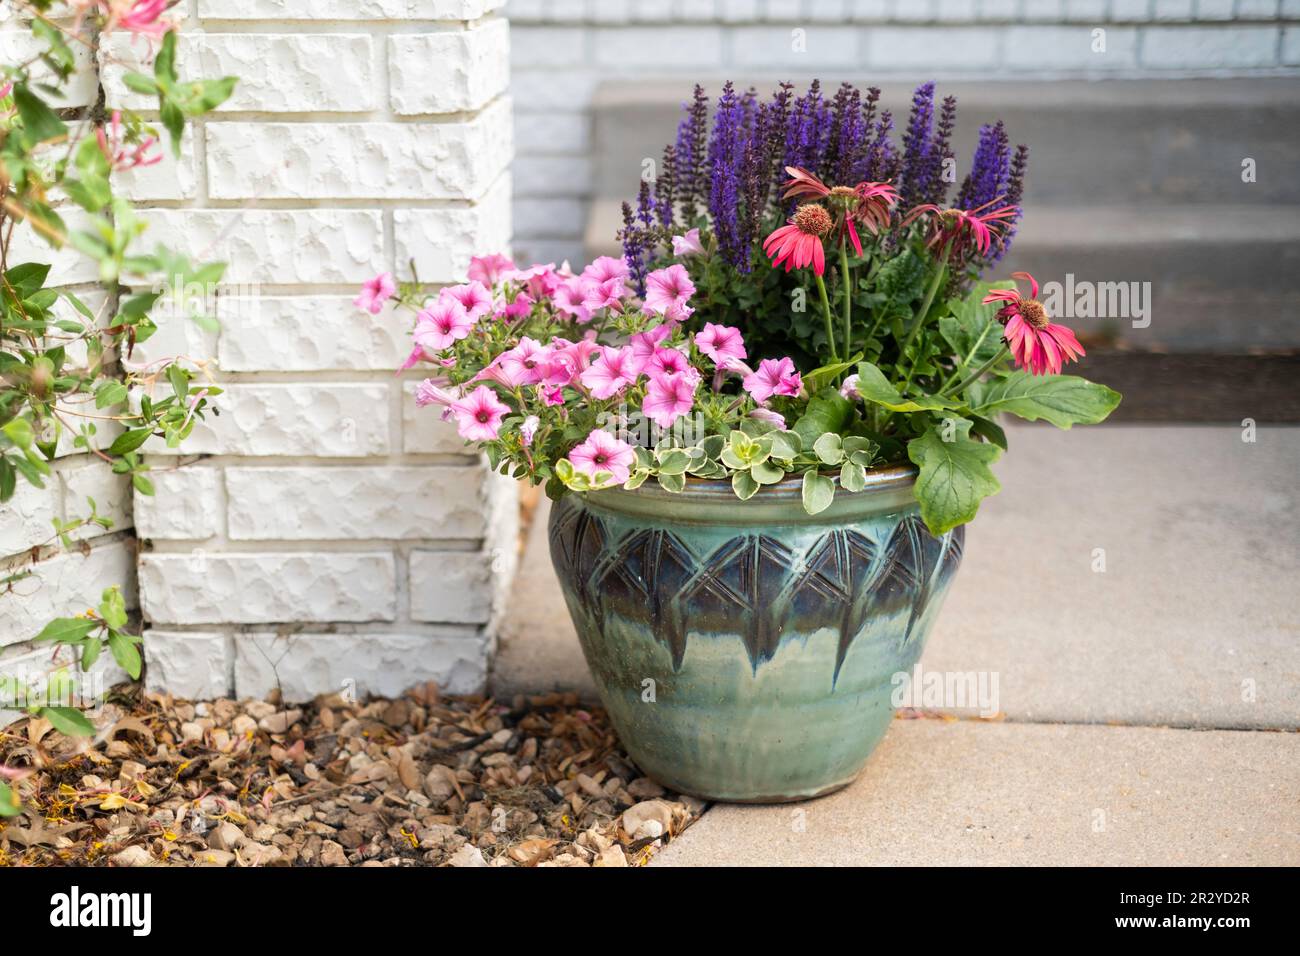 A pot filled with red Gerbera daisies,Gerbera jamesonii, and pink petunias, 'bubblegum pink' in front of a brick courtyard fence. USA. Stock Photo